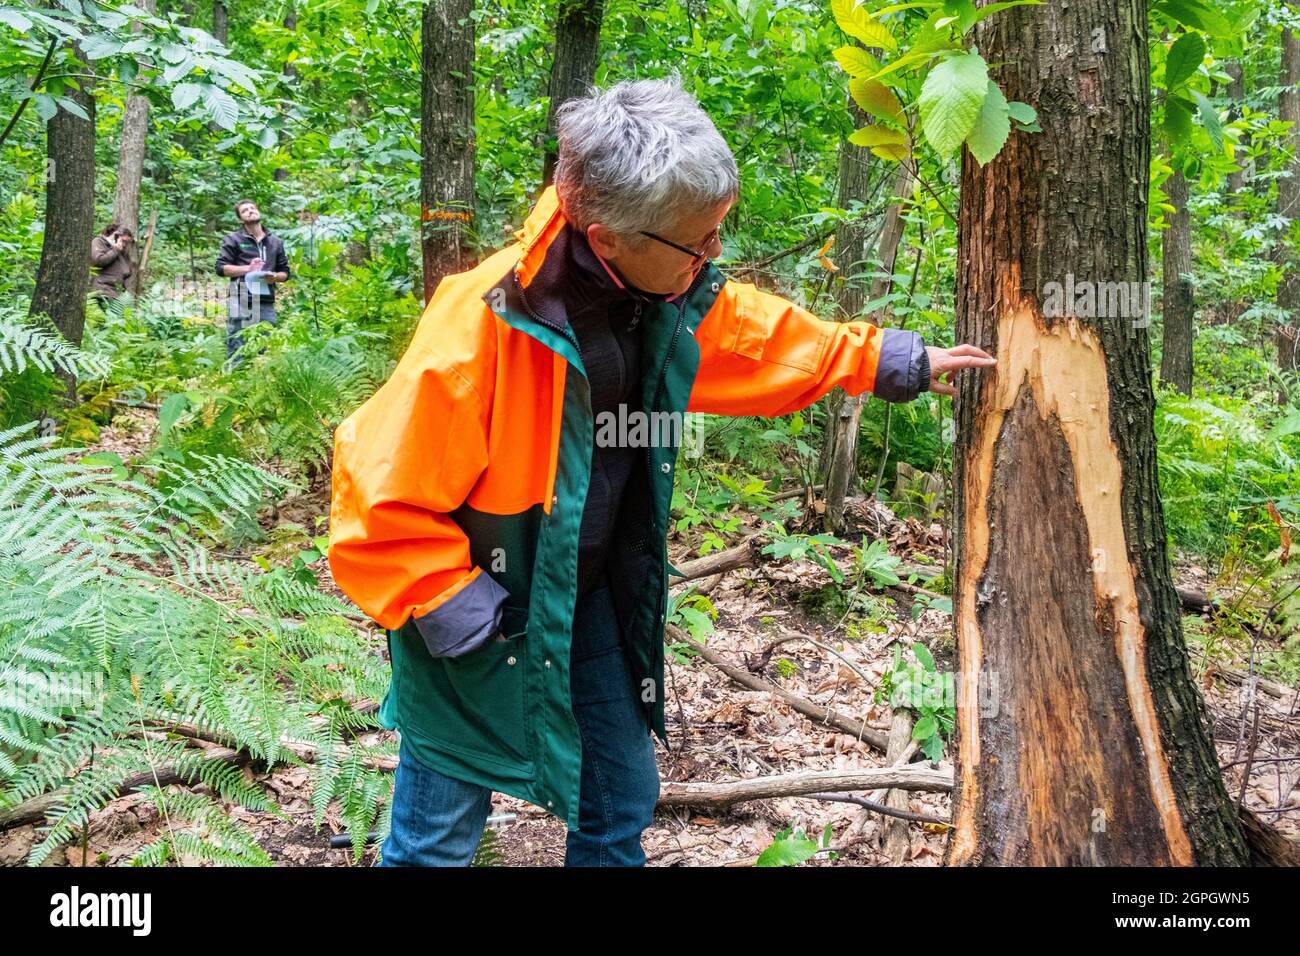 France, Val d'Oise, Montmorency forest, Ink disease (Phytophthora pathogen), Cecile Robin analyzes necrosis (dark spot) on the chestnut tree Stock Photo